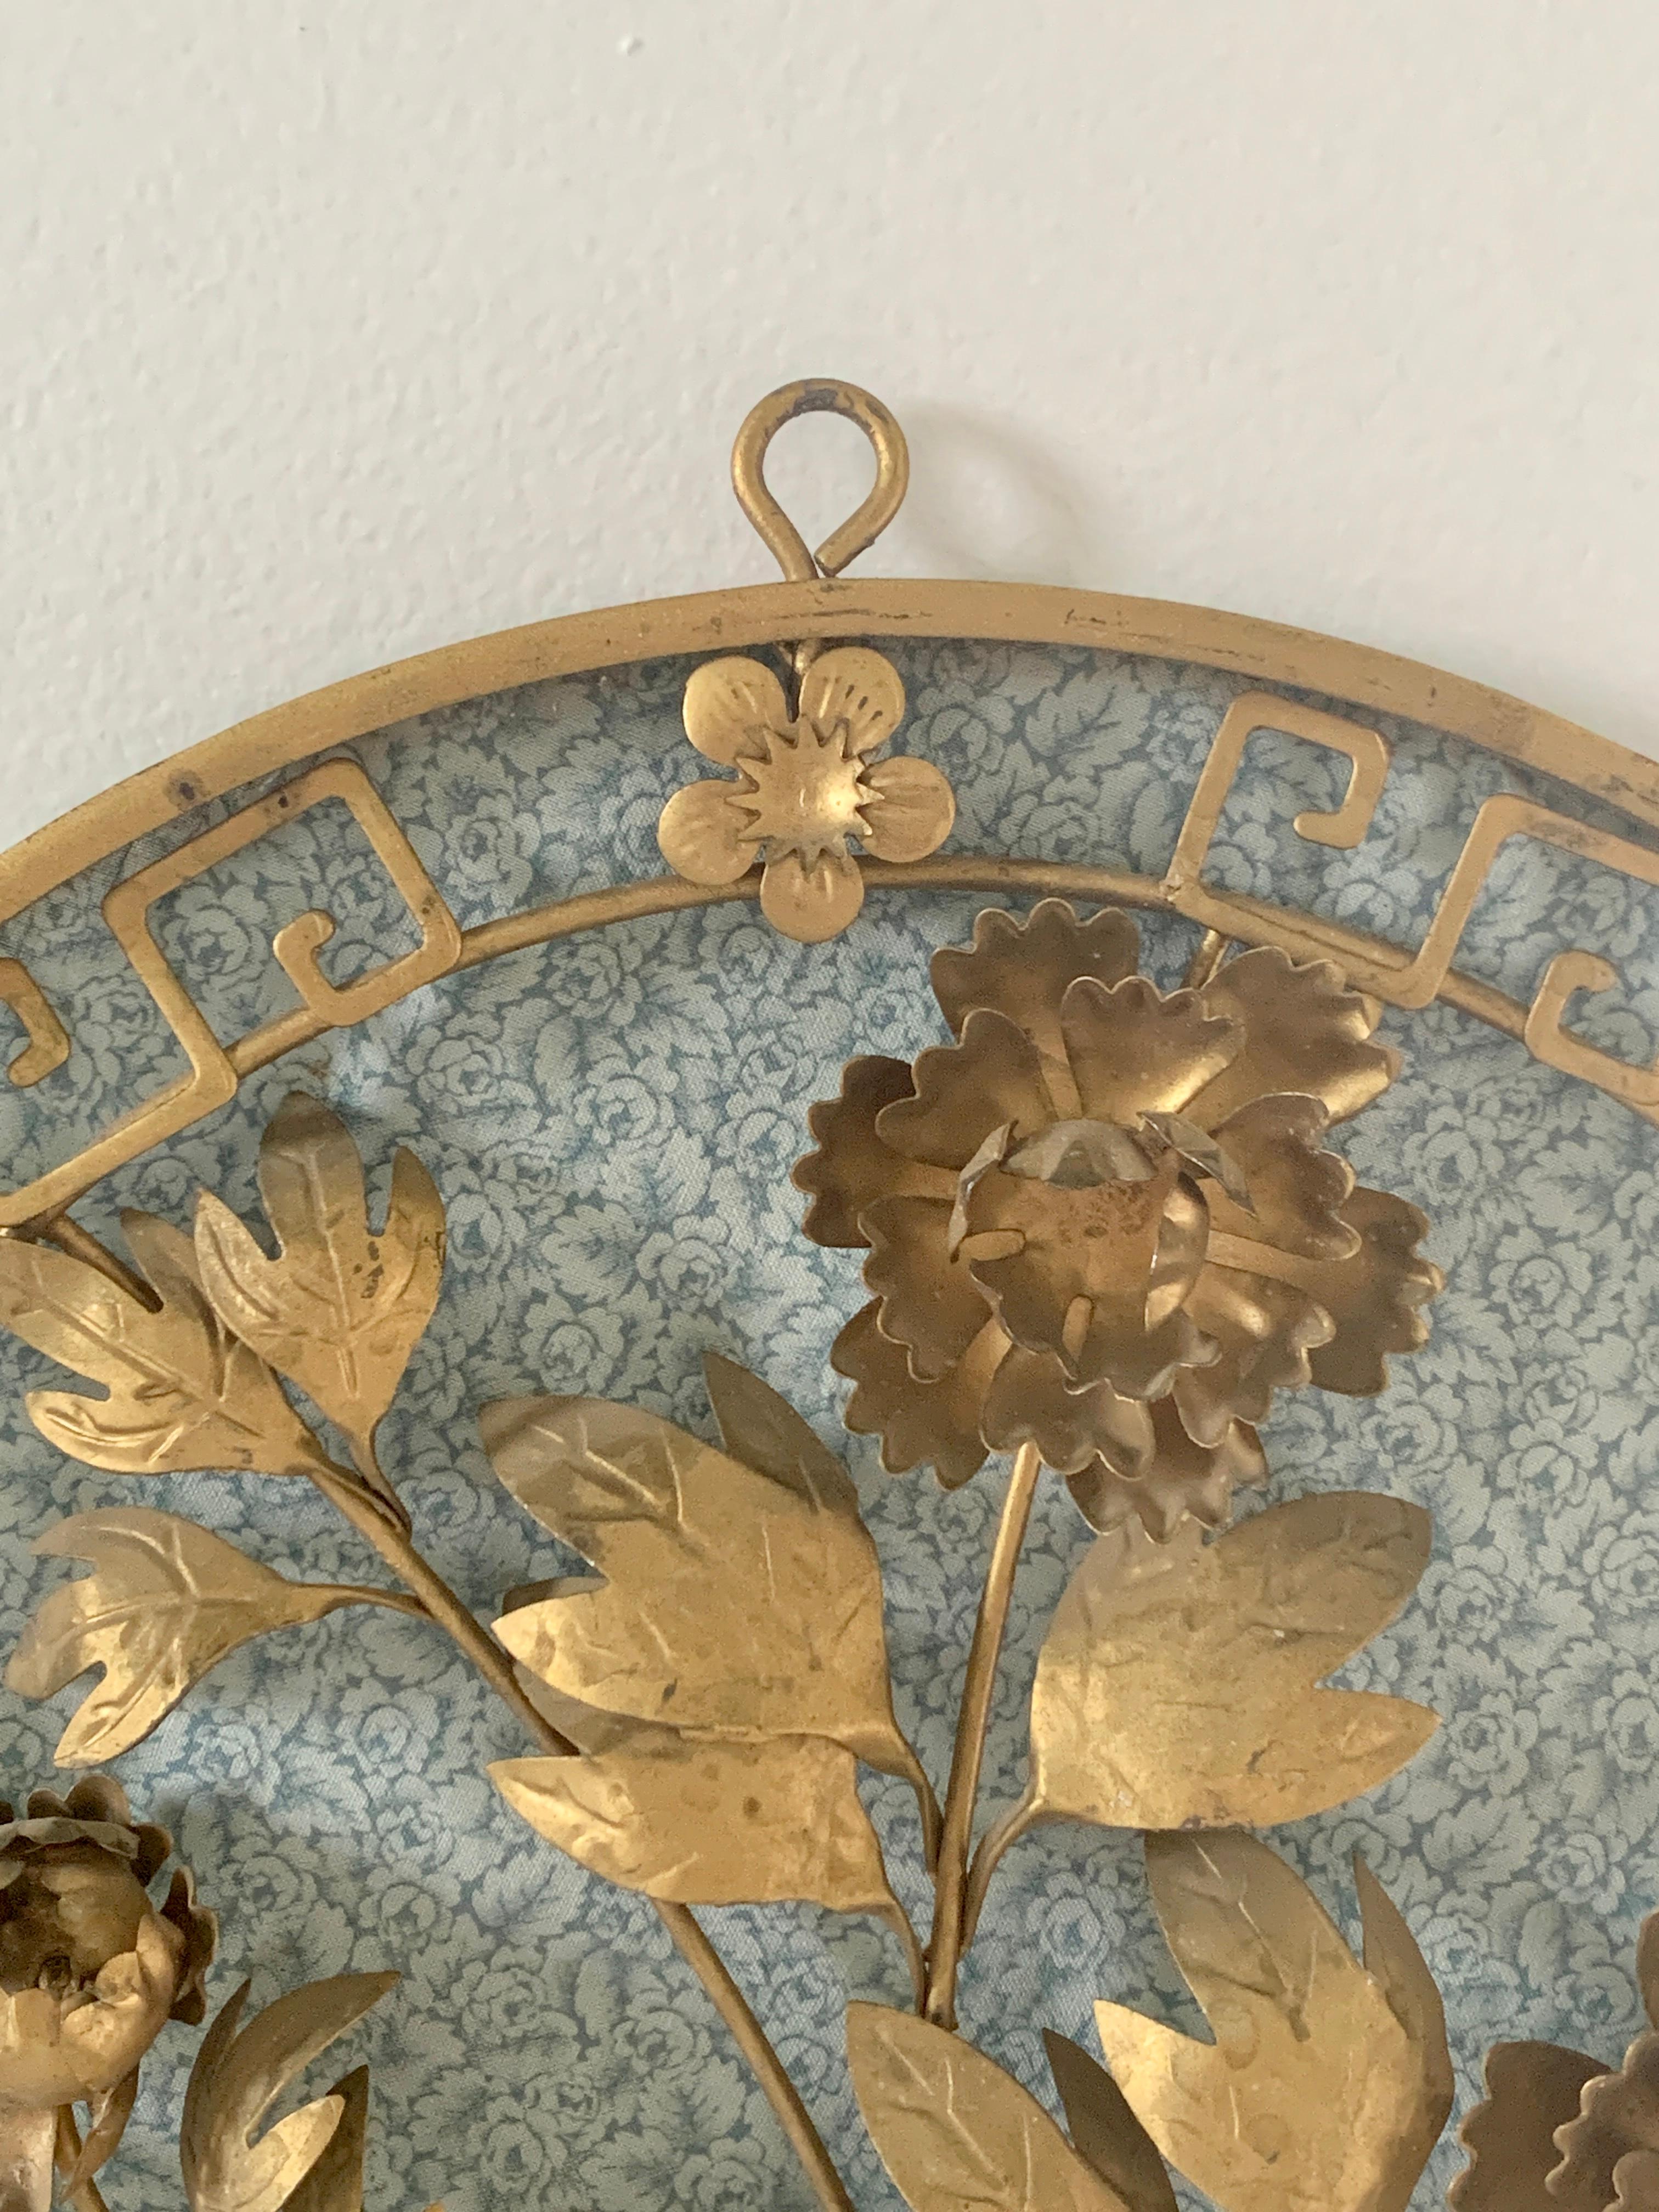 A charming pair of wall hanging medallions featuring a greek key border and floral bouquets

USA, Mid-20th Century

Brass, with blue fabric backing. Fabric can be removed or replaced with another fabric or mirror.

Measures: 12